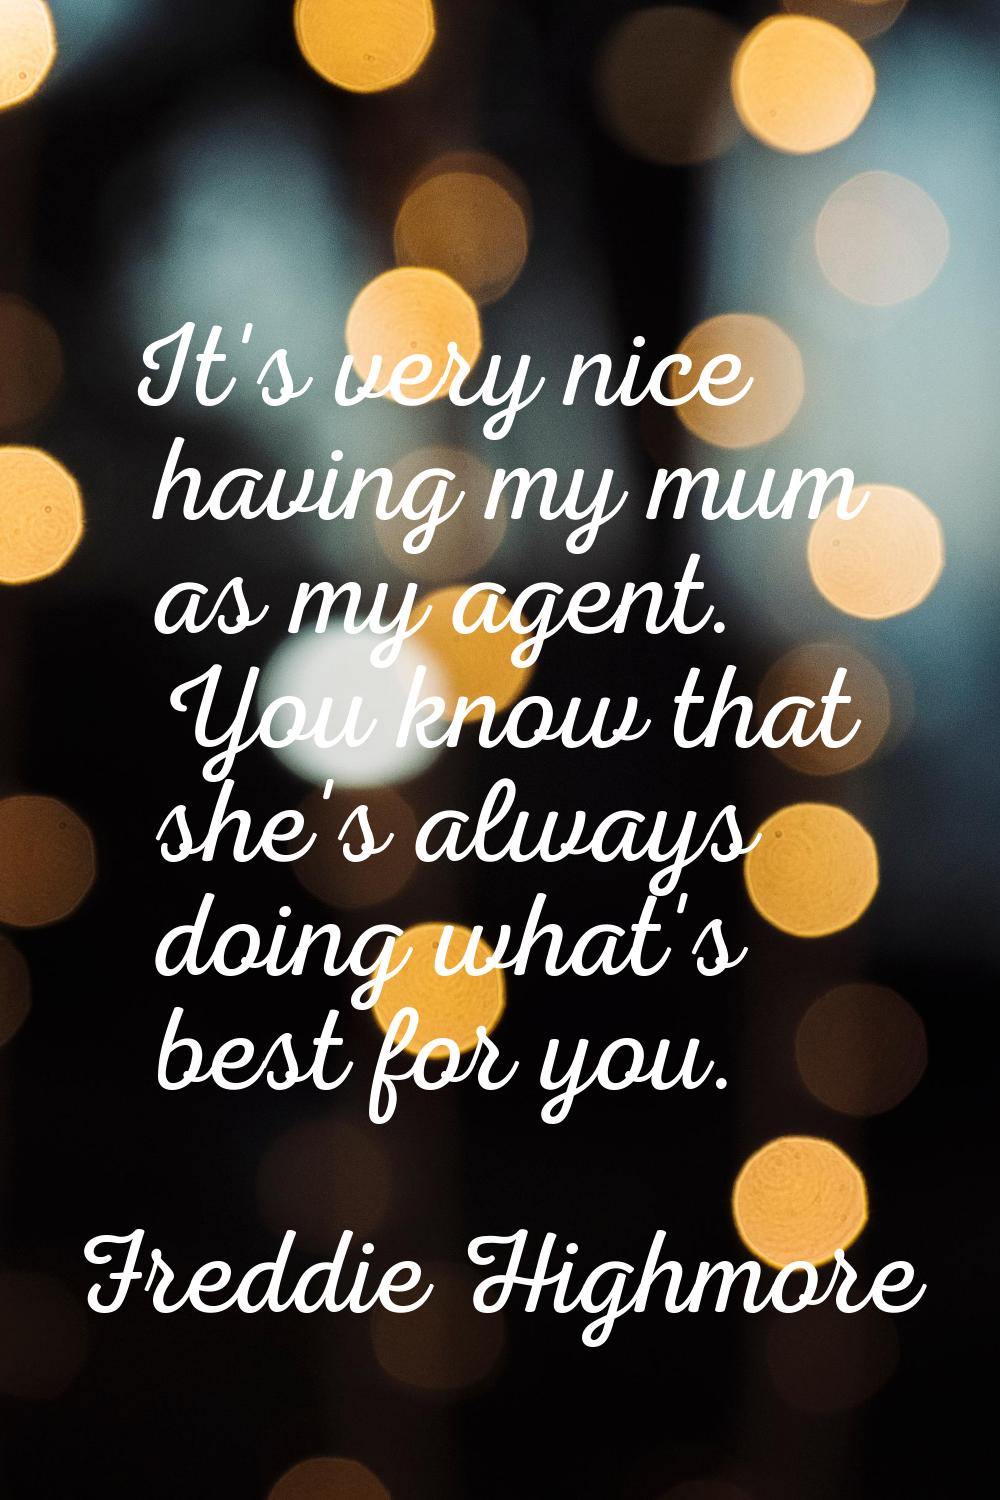 It's very nice having my mum as my agent. You know that she's always doing what's best for you.